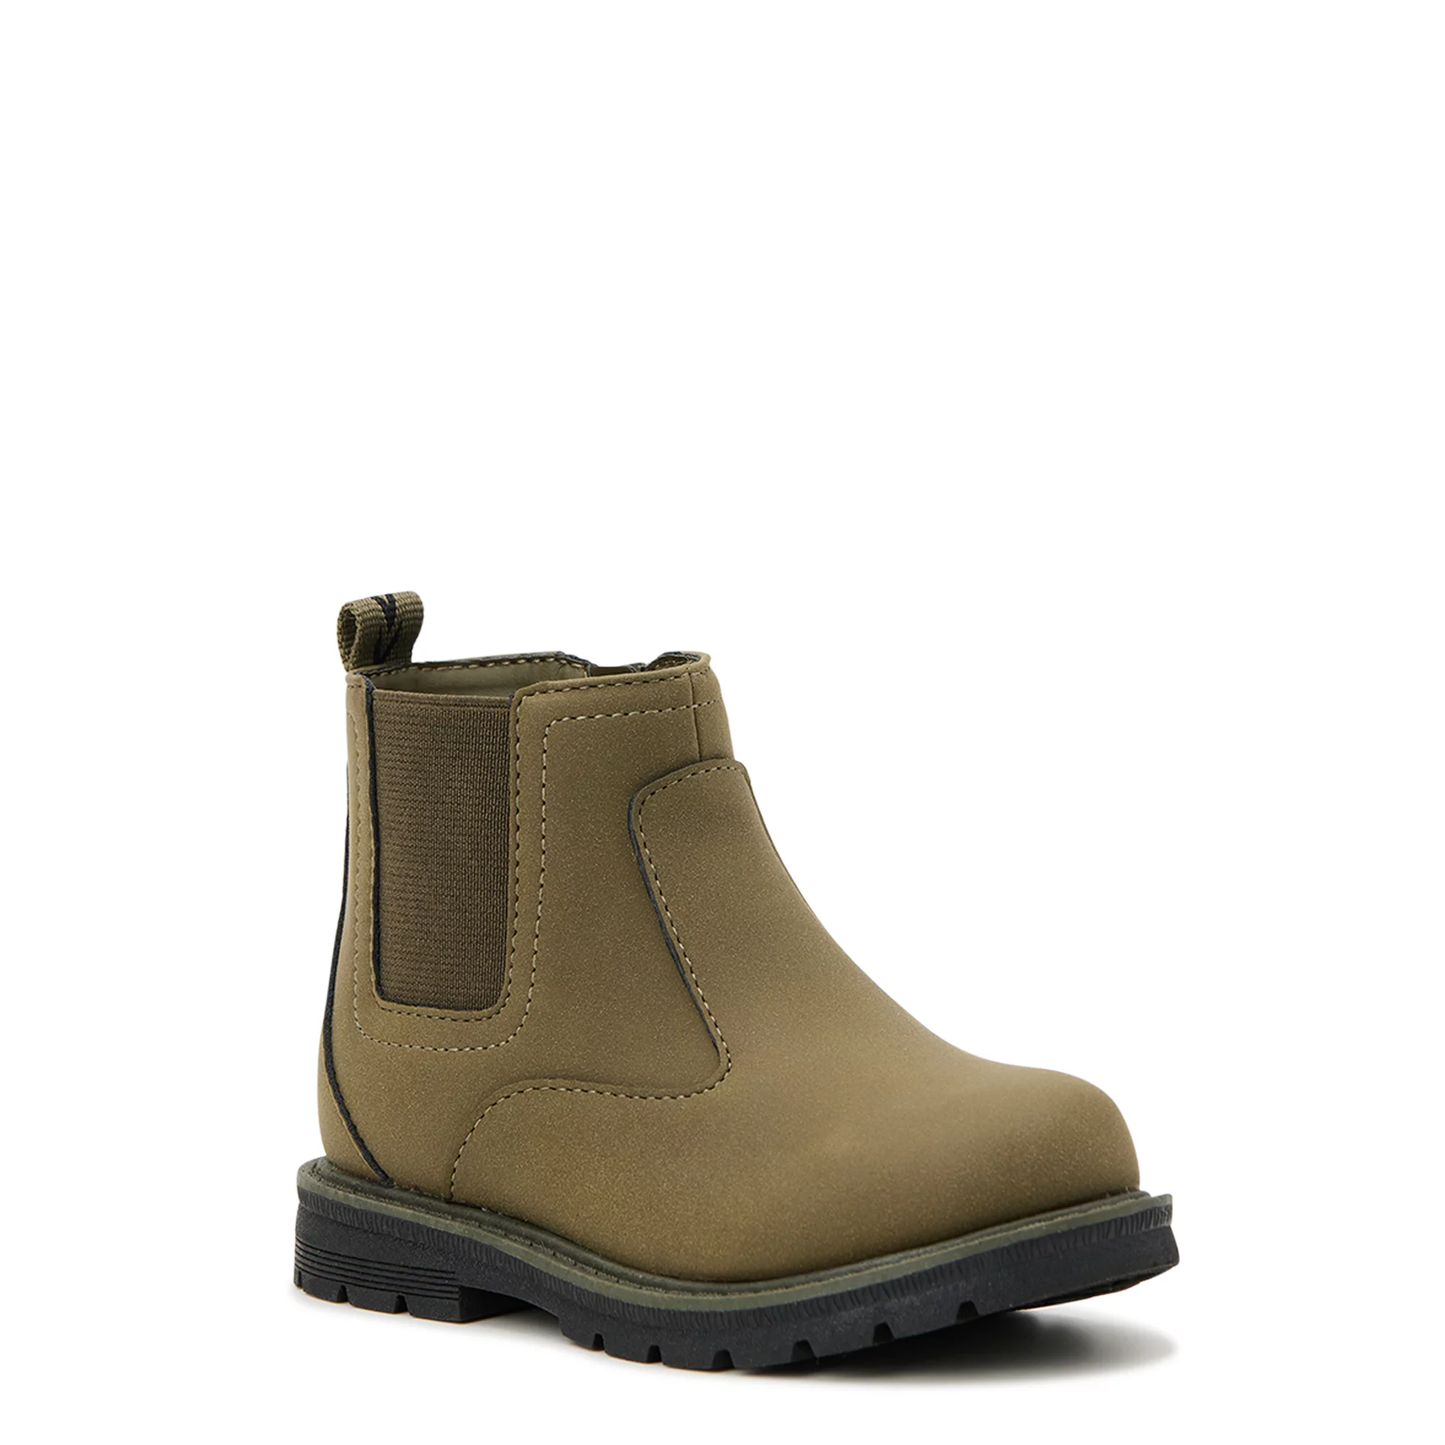 Toddler Boys’ Classic Style Chelsea Boots